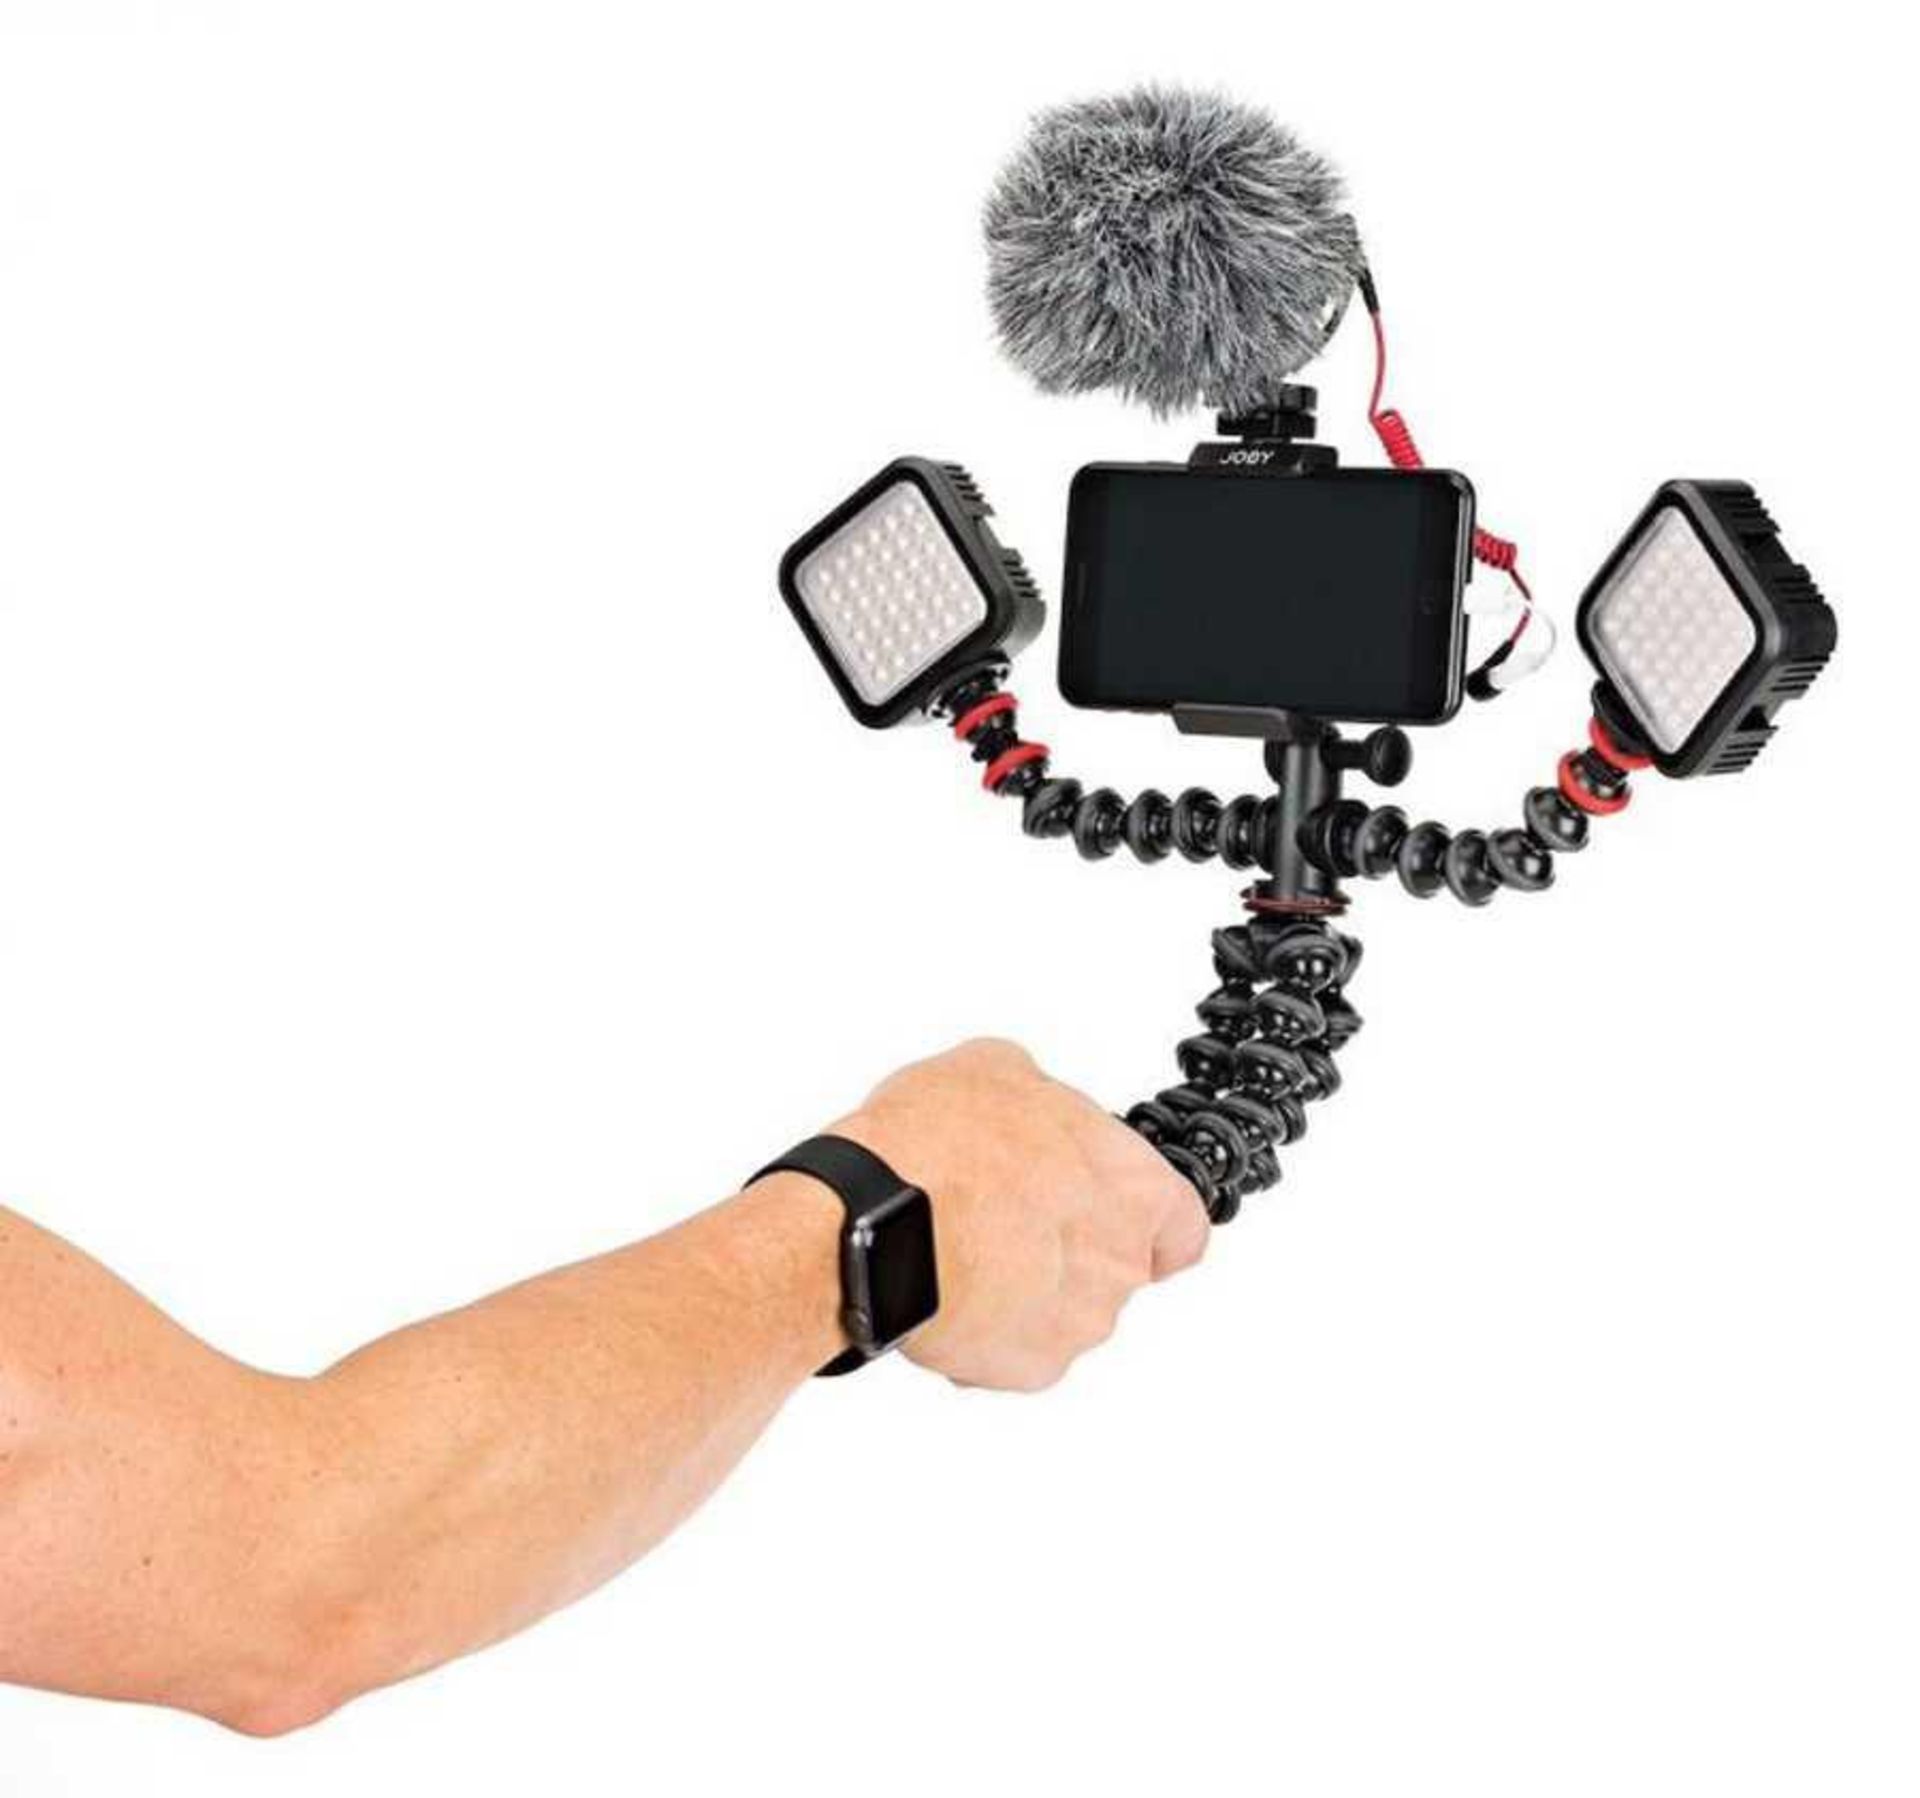 Rrp £100. Boxed Joby Gorillapod Mobile Rig